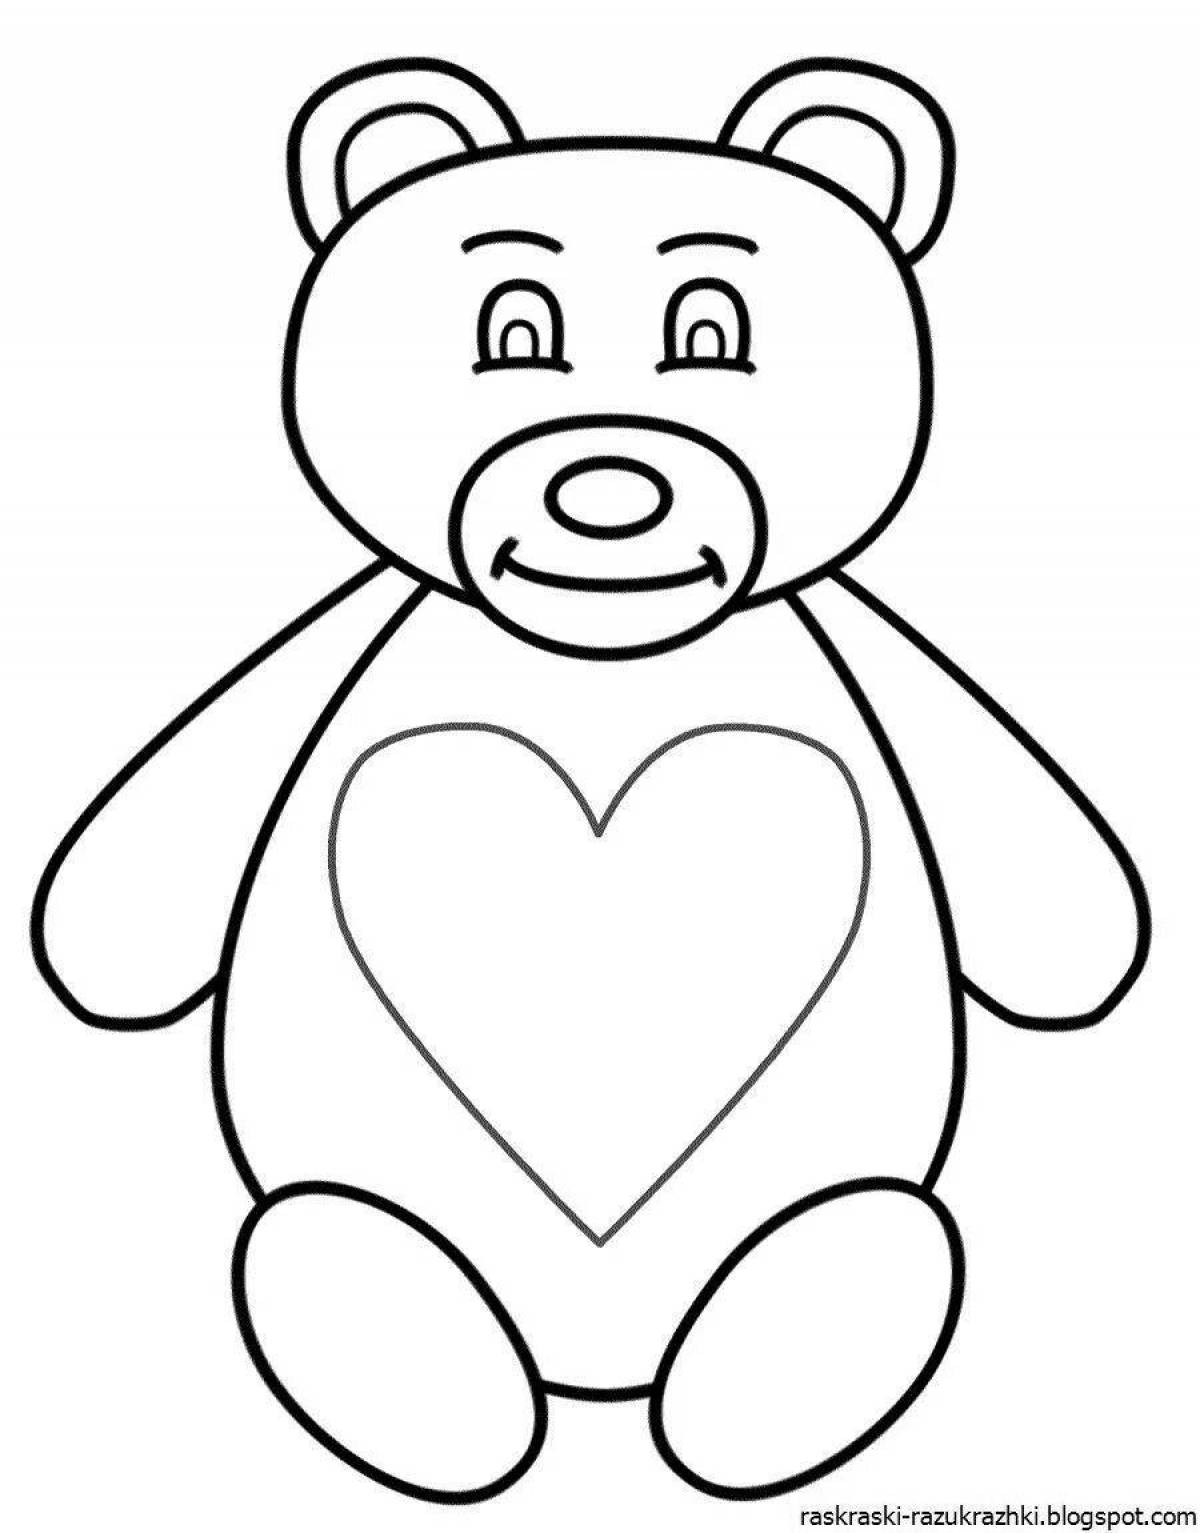 Grinning bear coloring page